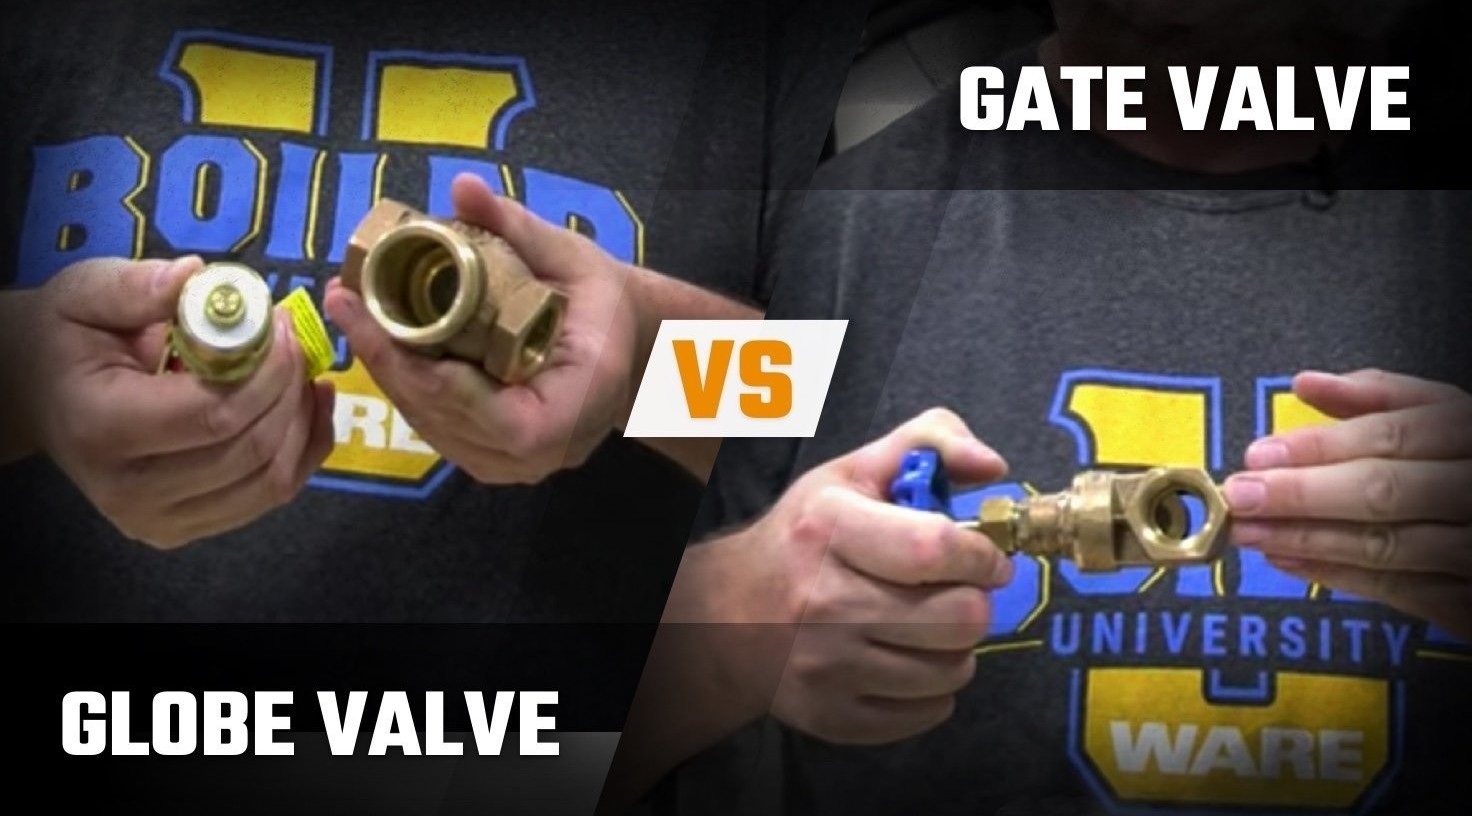 What are the differences between a Gate Valve and a Globe Valve?